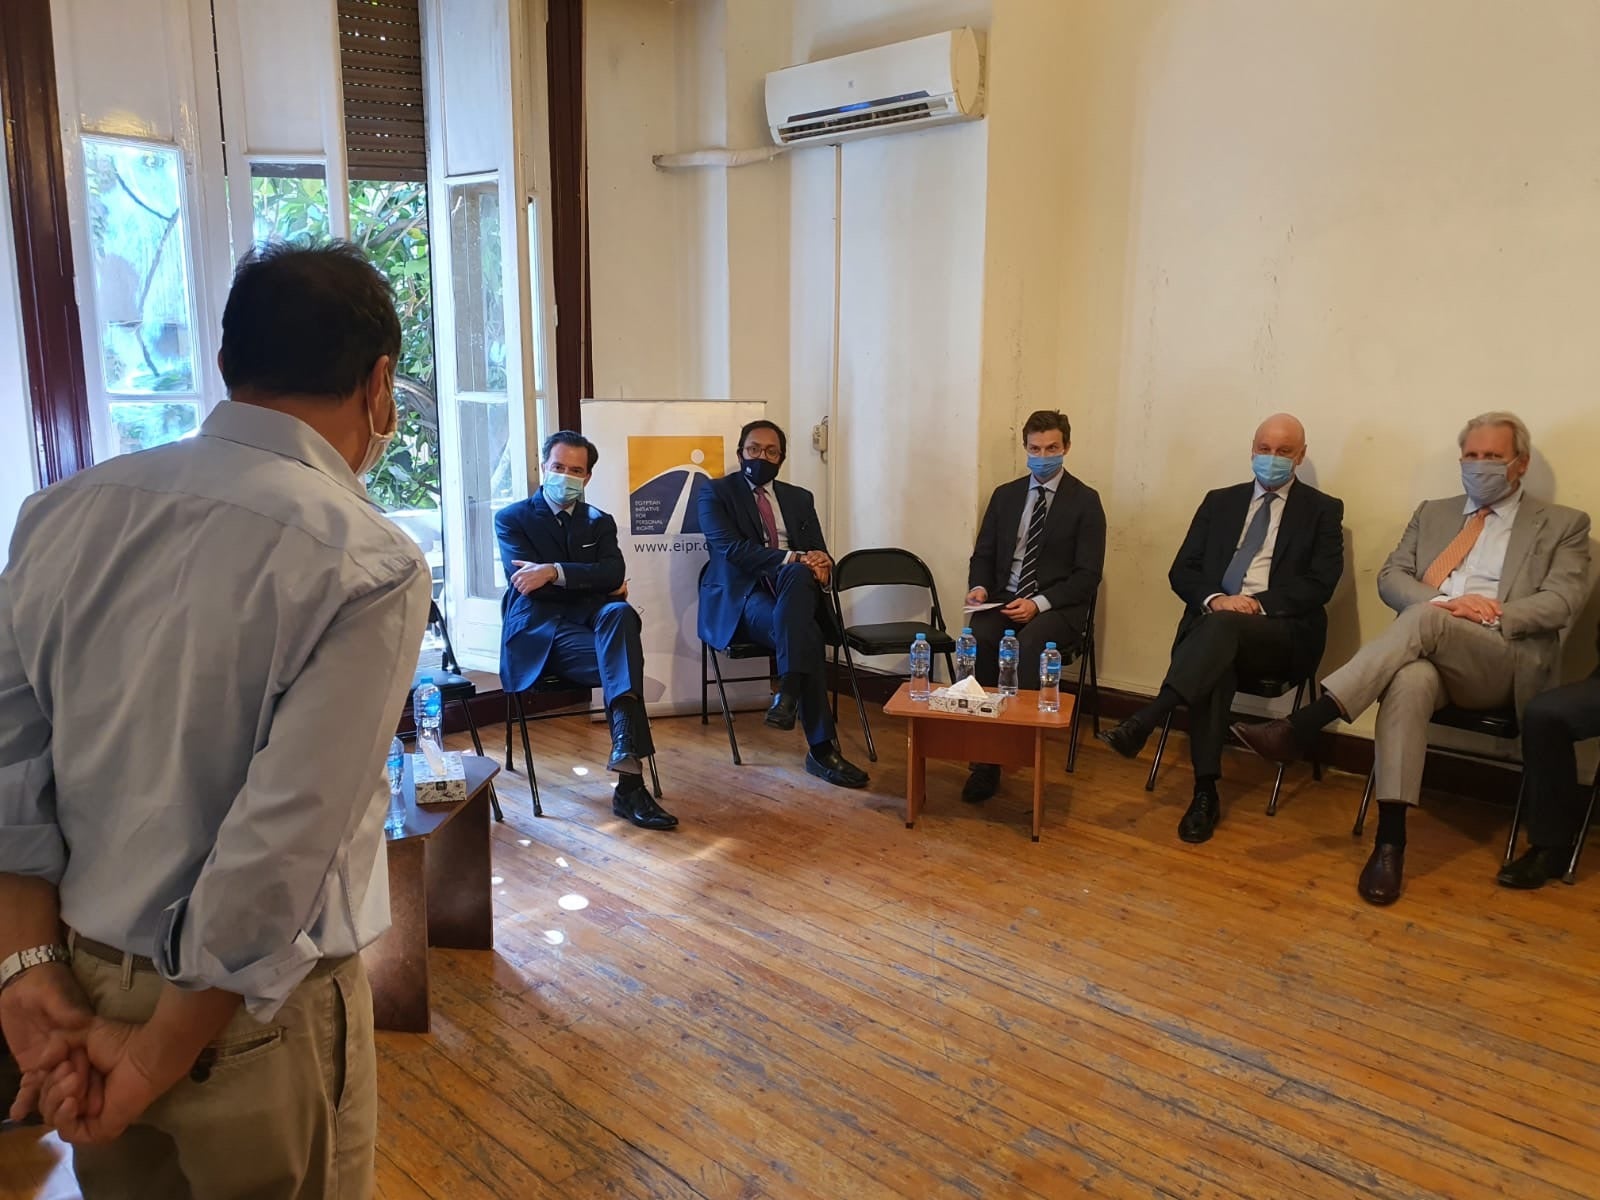 Several European diplomats attend a meeting at the Egyptian Initiative for Personal Rights' (EIPR) office in Cairo on November 3, 2020.